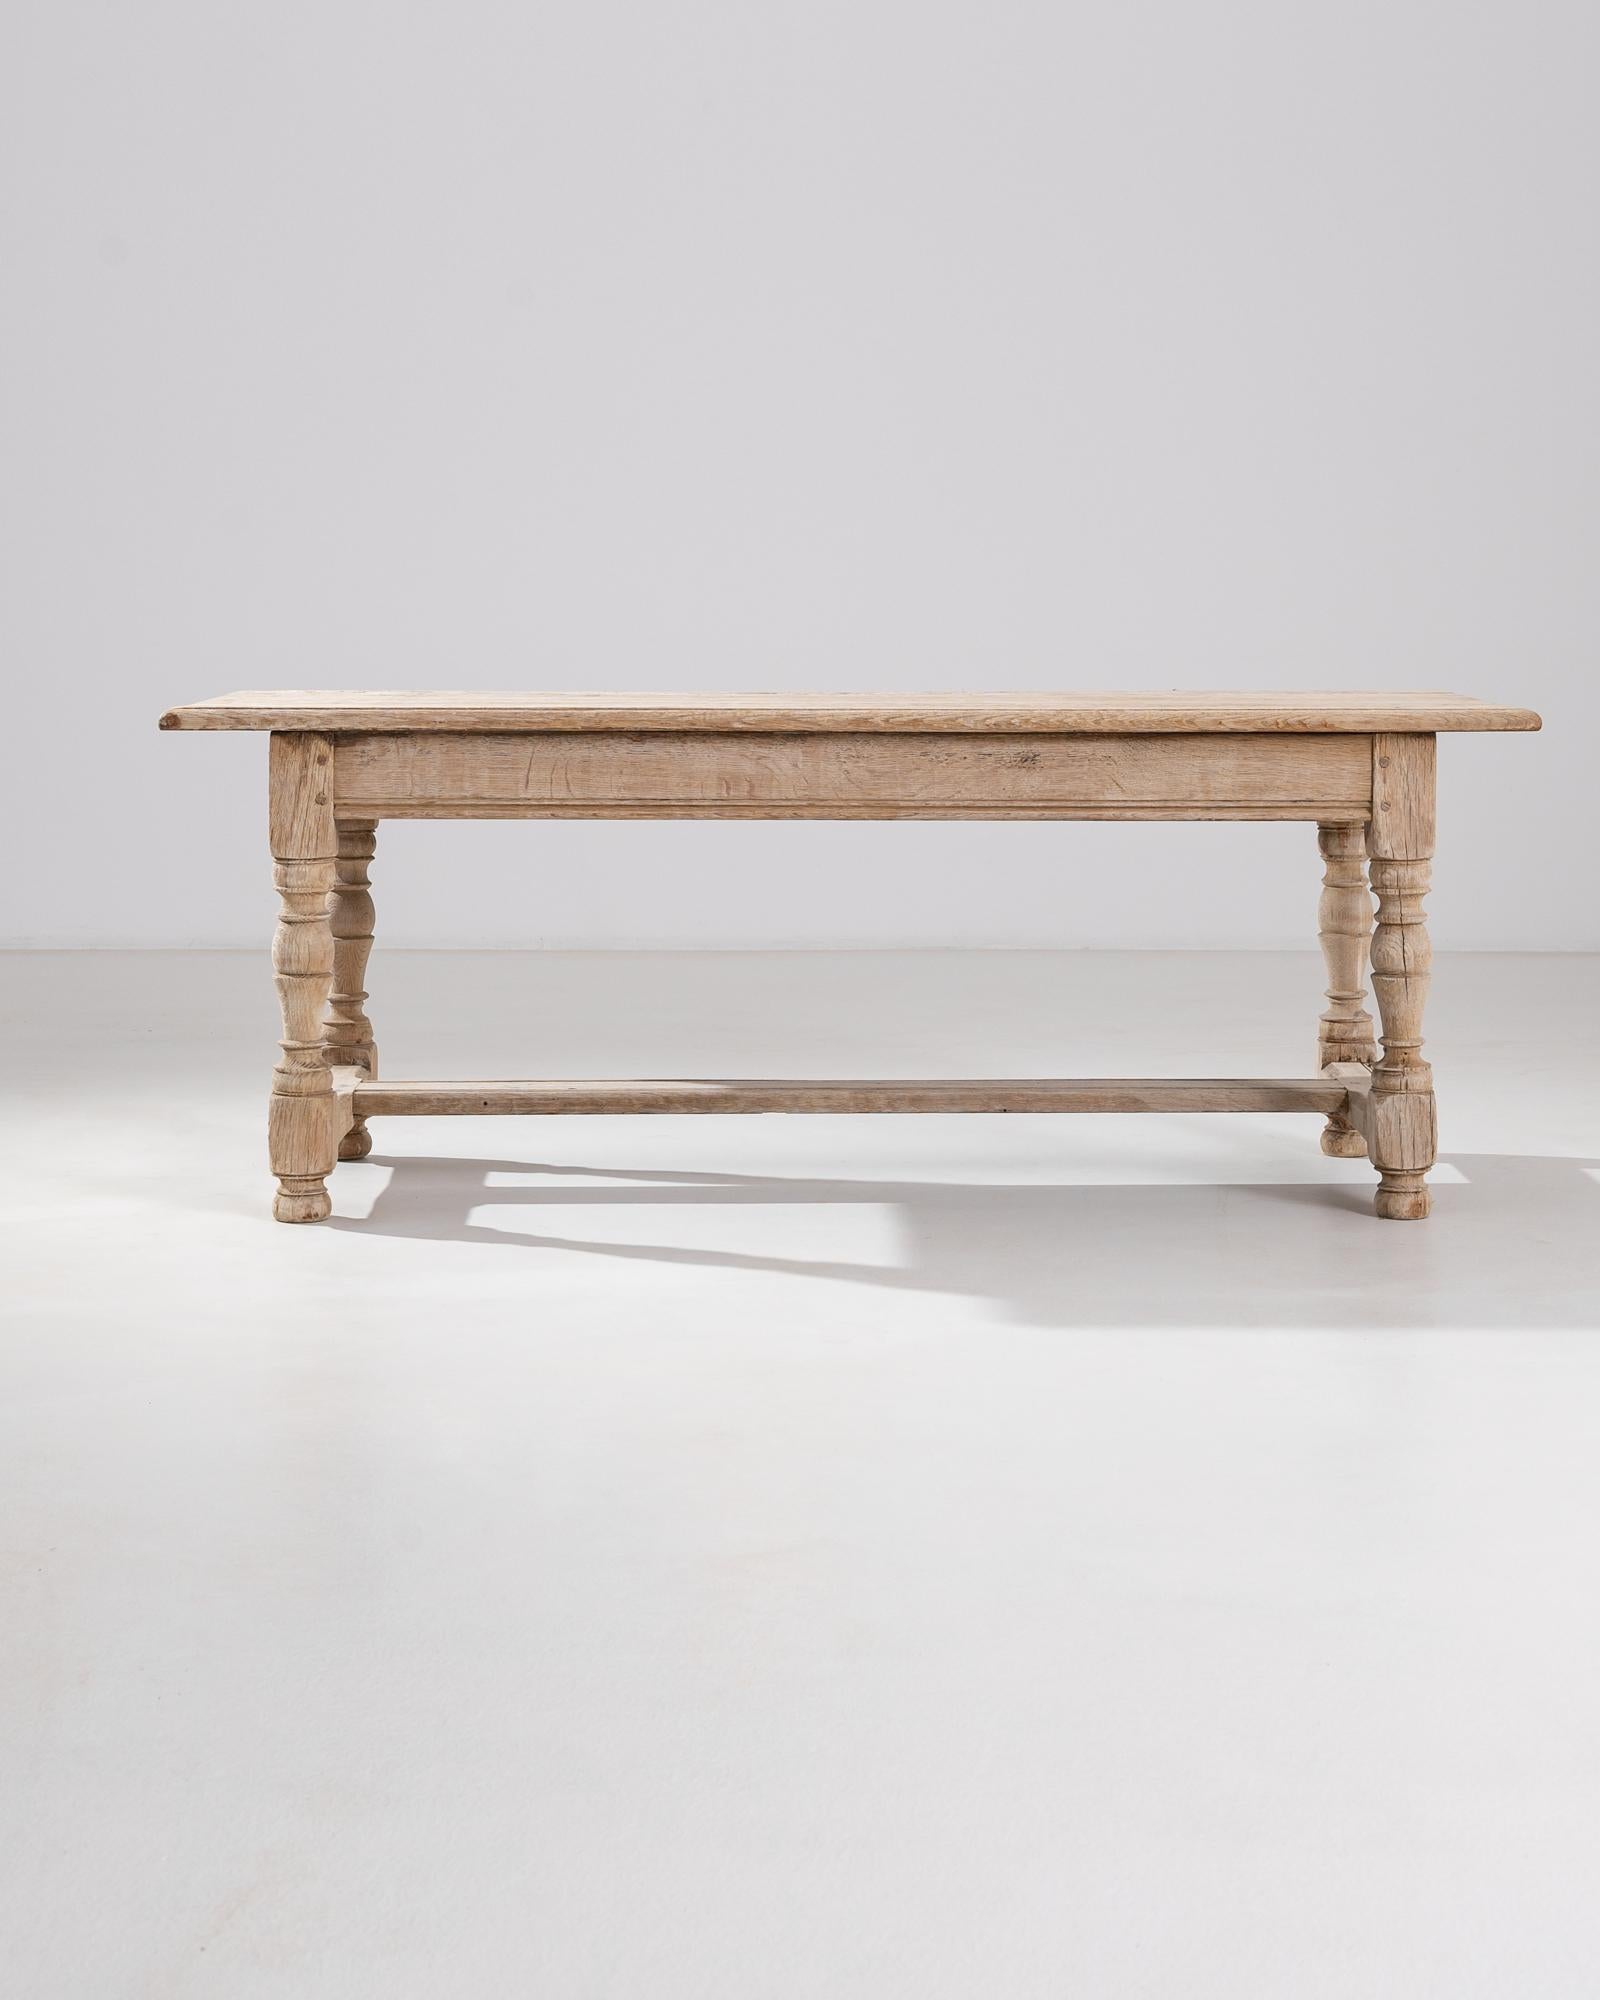 A belgian bleached oak coffee table from the 20th century. Lathed legs, wooden pins, and hand-carved edge details all speak to the high sense of craft that makes this unique table possible. A dialogue between past and present, the rich wood grain